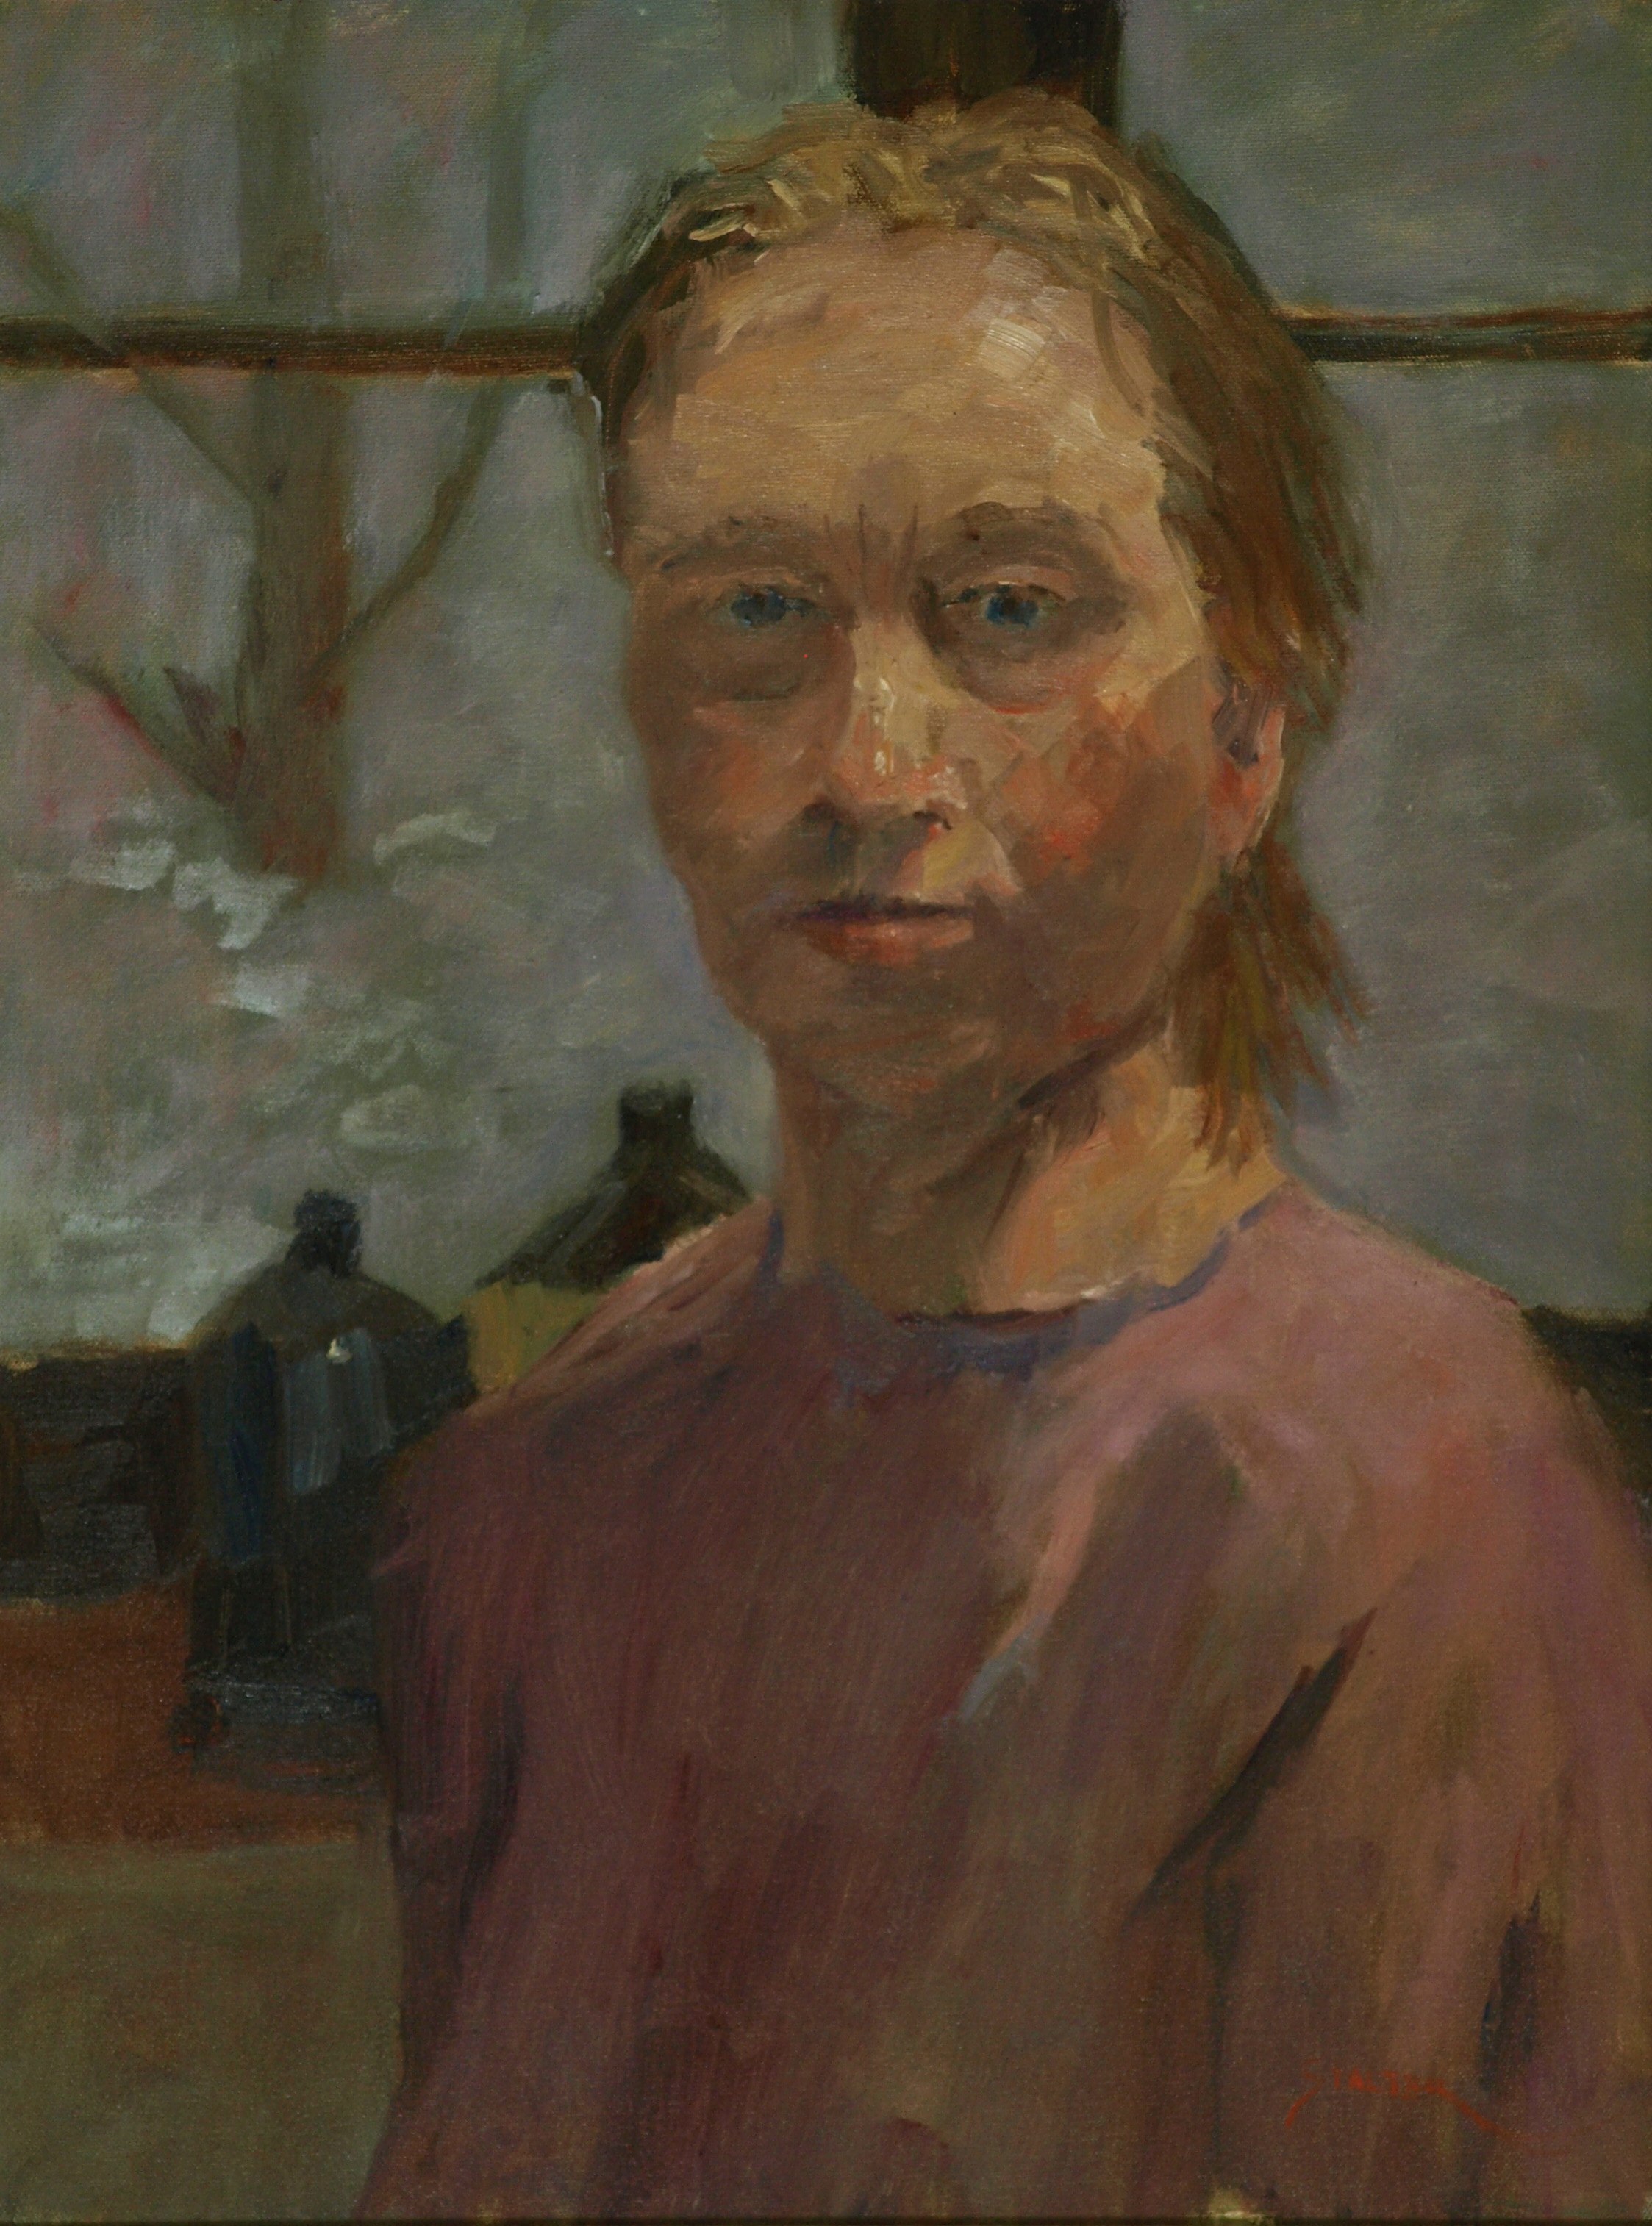 Sue in the Studio, Oil on Canvas, 24 x 18 Inches, by Richard Stalter, $475